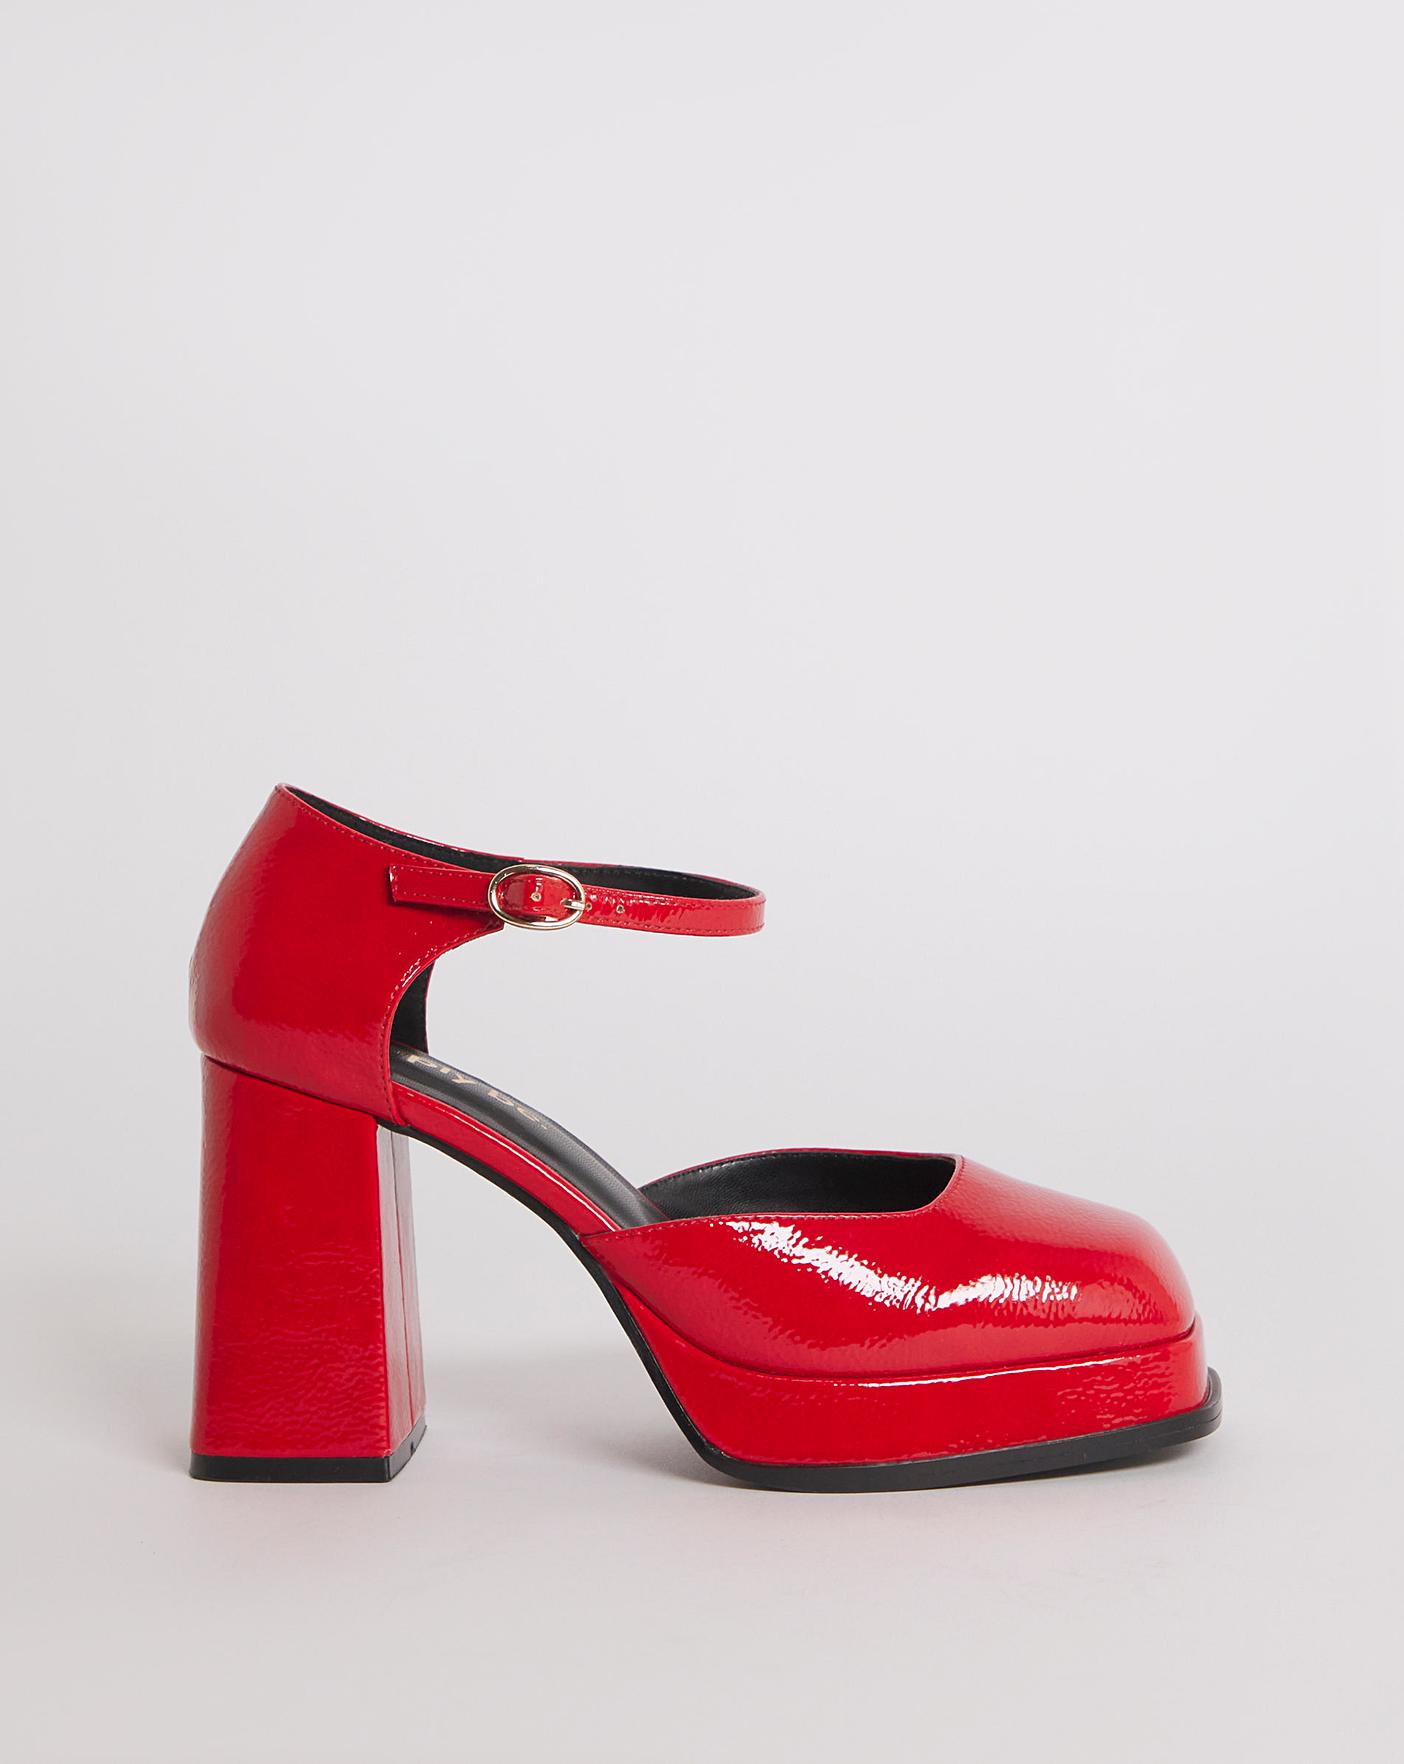 Guess Women's Kabaile Two Piece Stiletto Heeled Dress Sandals | Westland  Mall